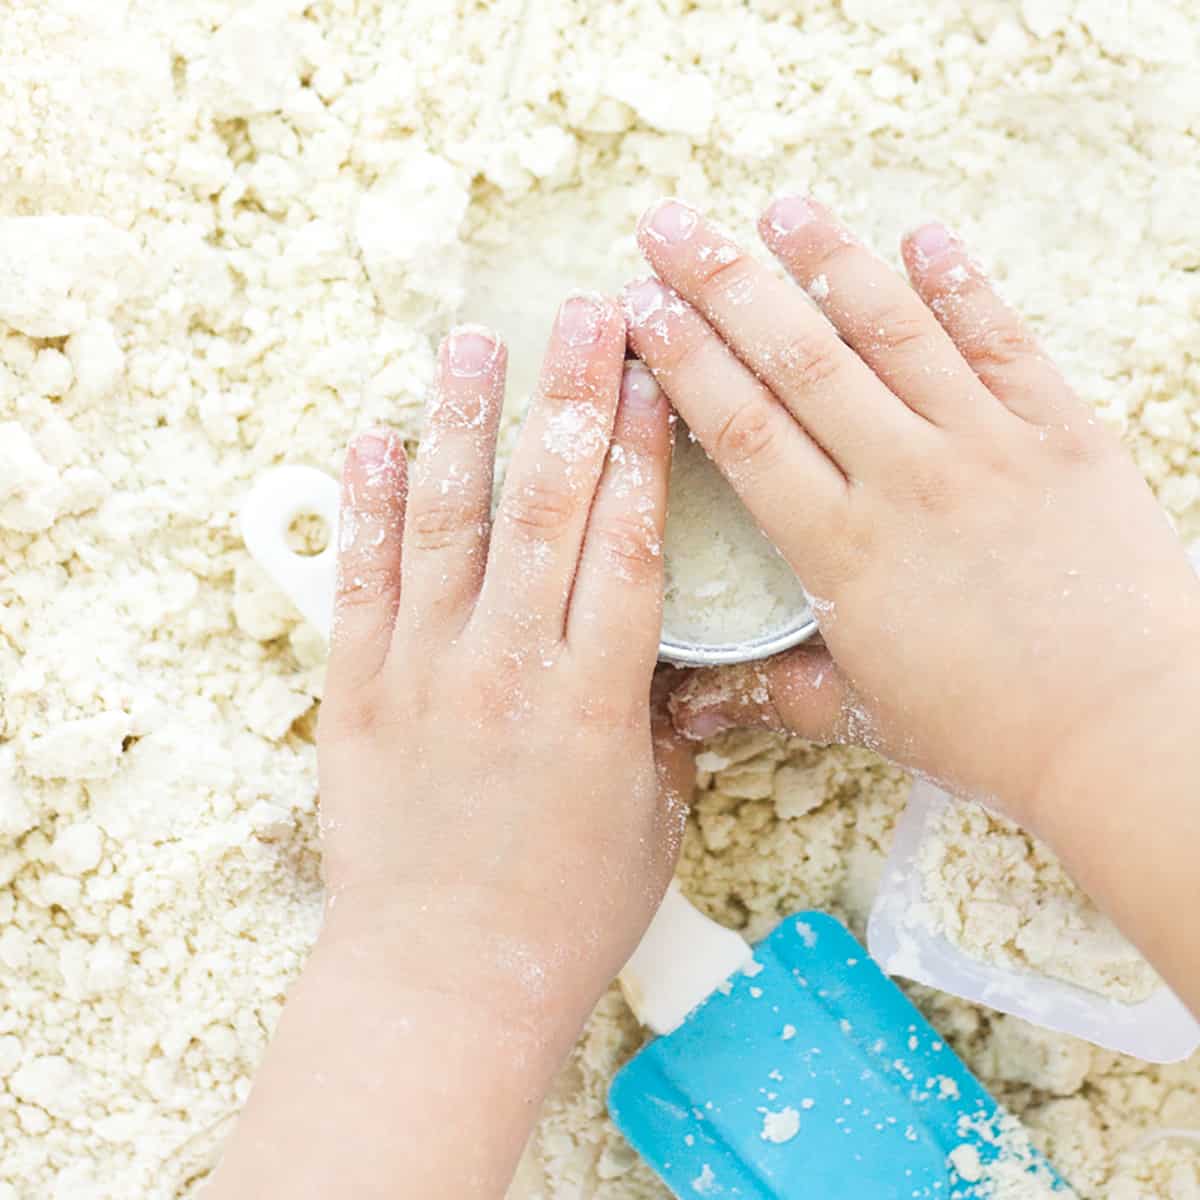 Make this Easy Fake Sand Recipe in minutes! - Tried & True Creative